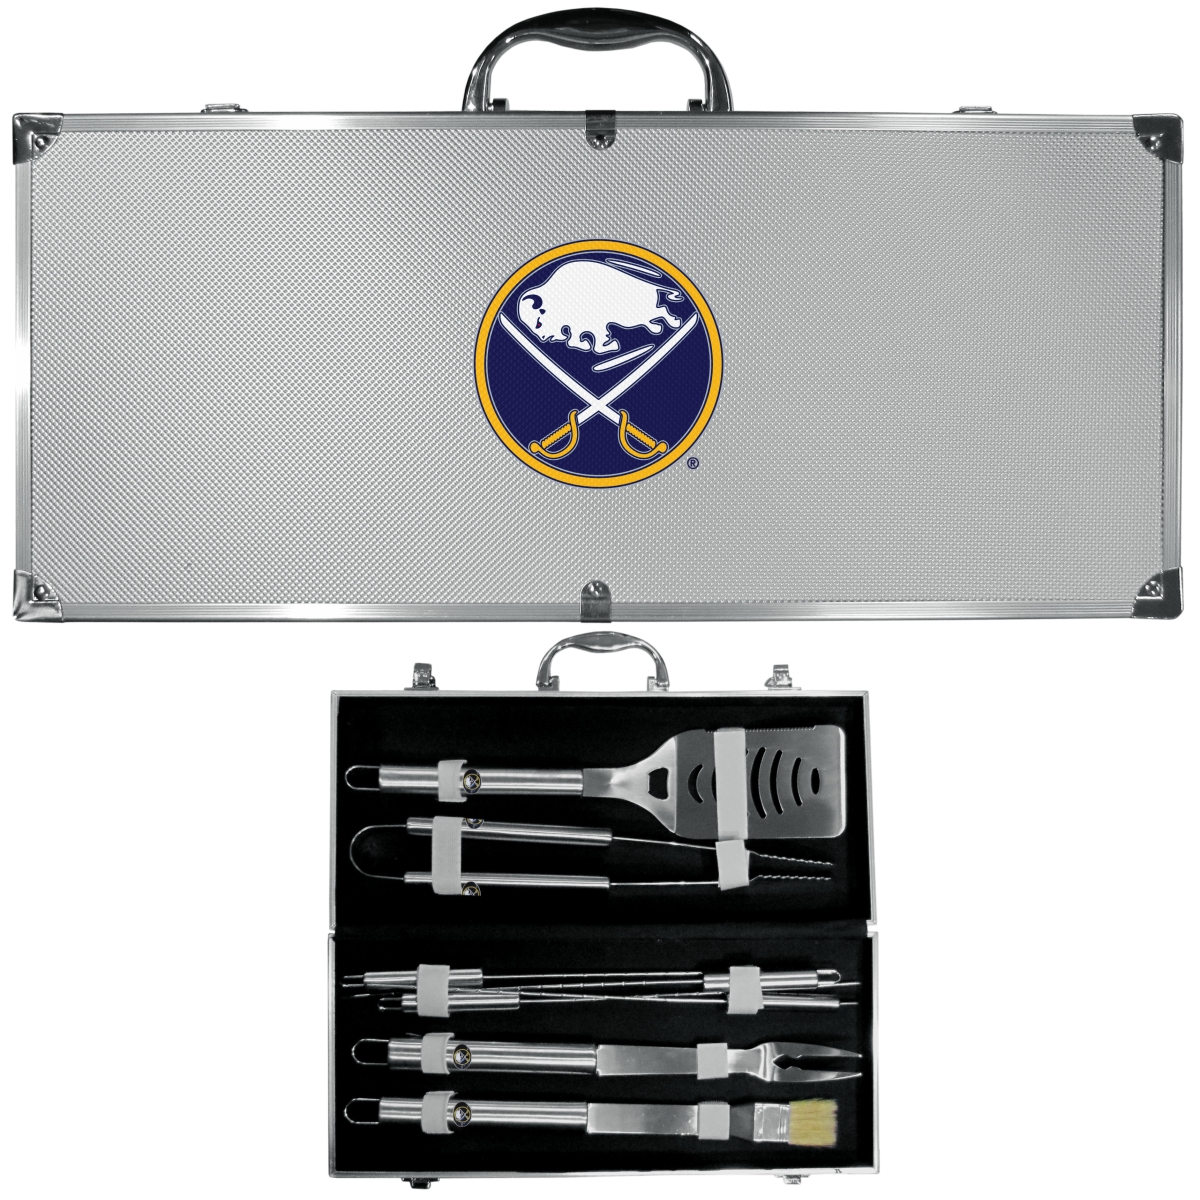 Picture of Siskiyou BBQH25B Unisex NHL Buffalo Sabres 8 Piece Stainless Steel BBQ Set with Metal Case